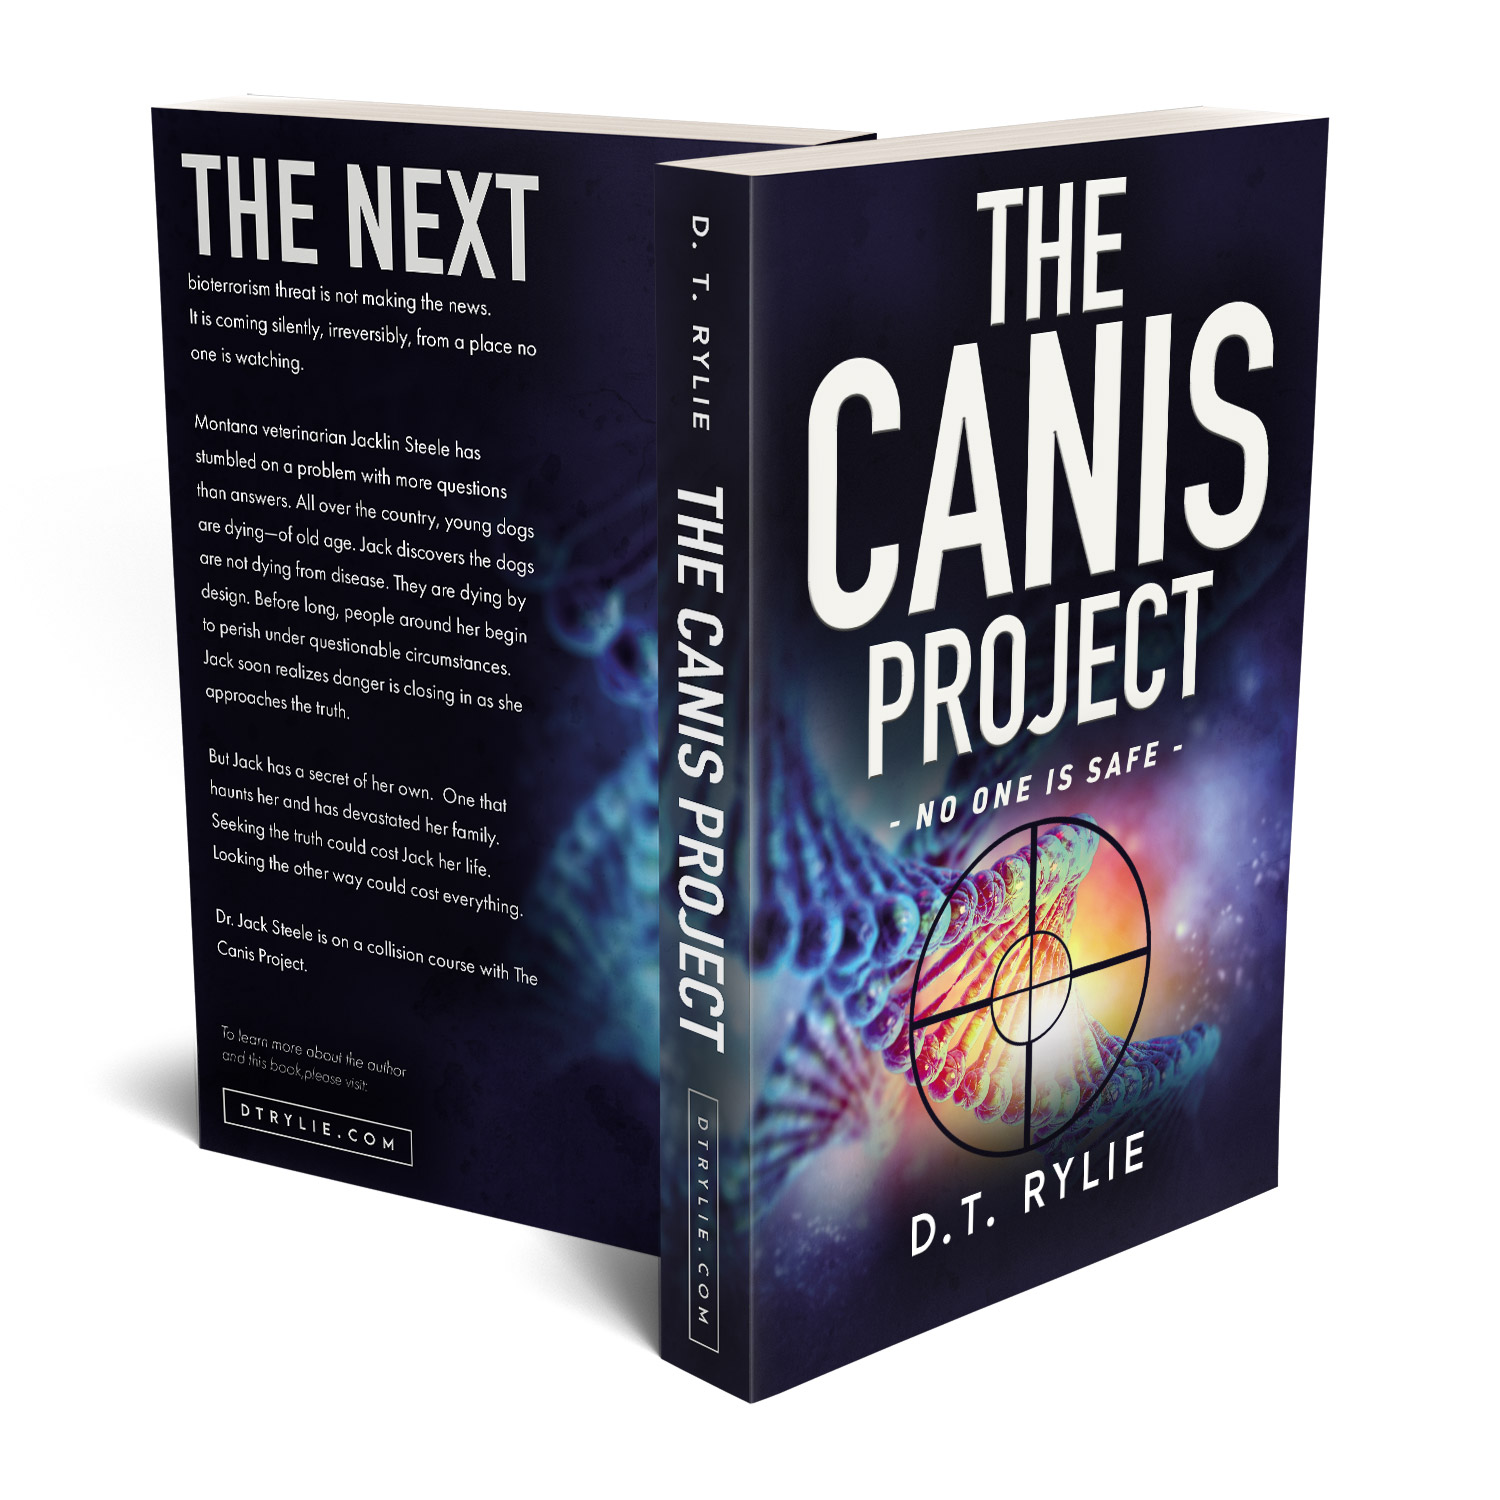 'The Canis Project' is a dark, genetics thriller by D.T. Rylie. The book cover design and interior formatting are by Mark Thomas. To learn more about what Mark could do for your book, please visit coverness.com.